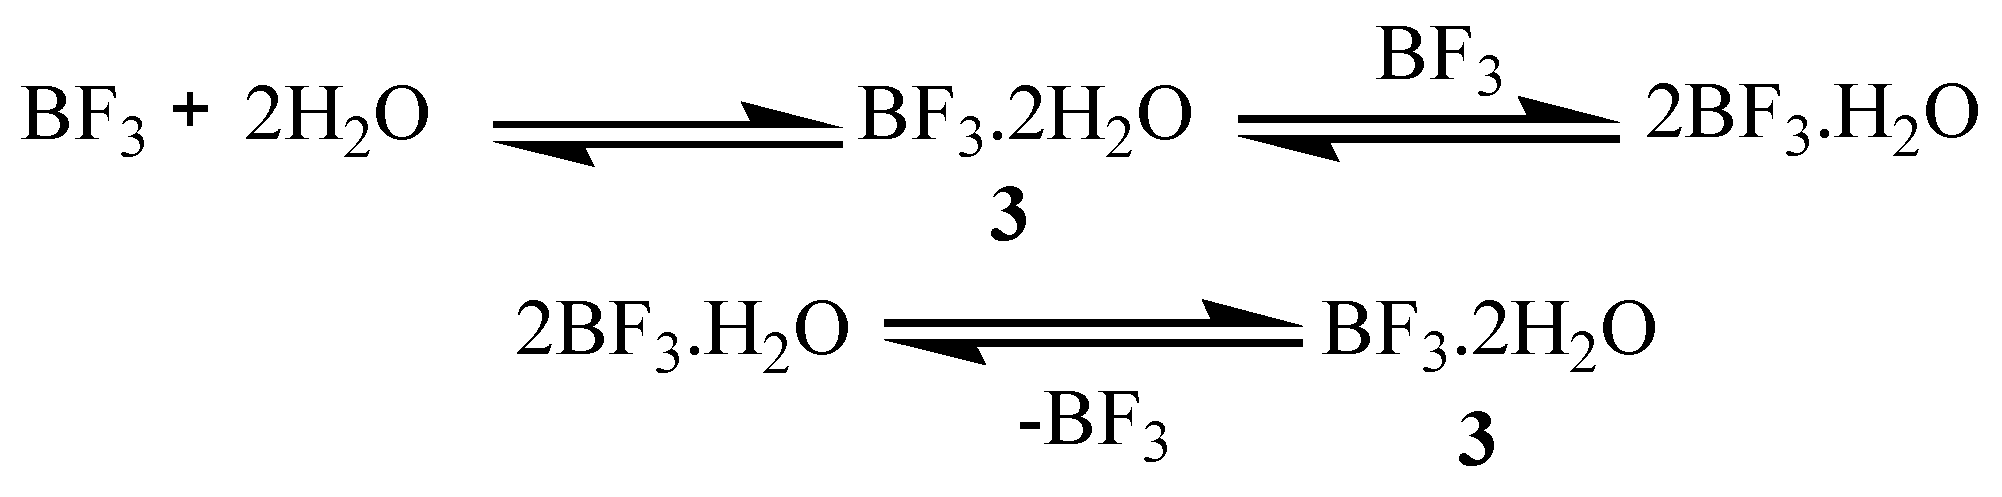 BF can be obtained by reaction of $\mathrm{BF}_3$ with boron